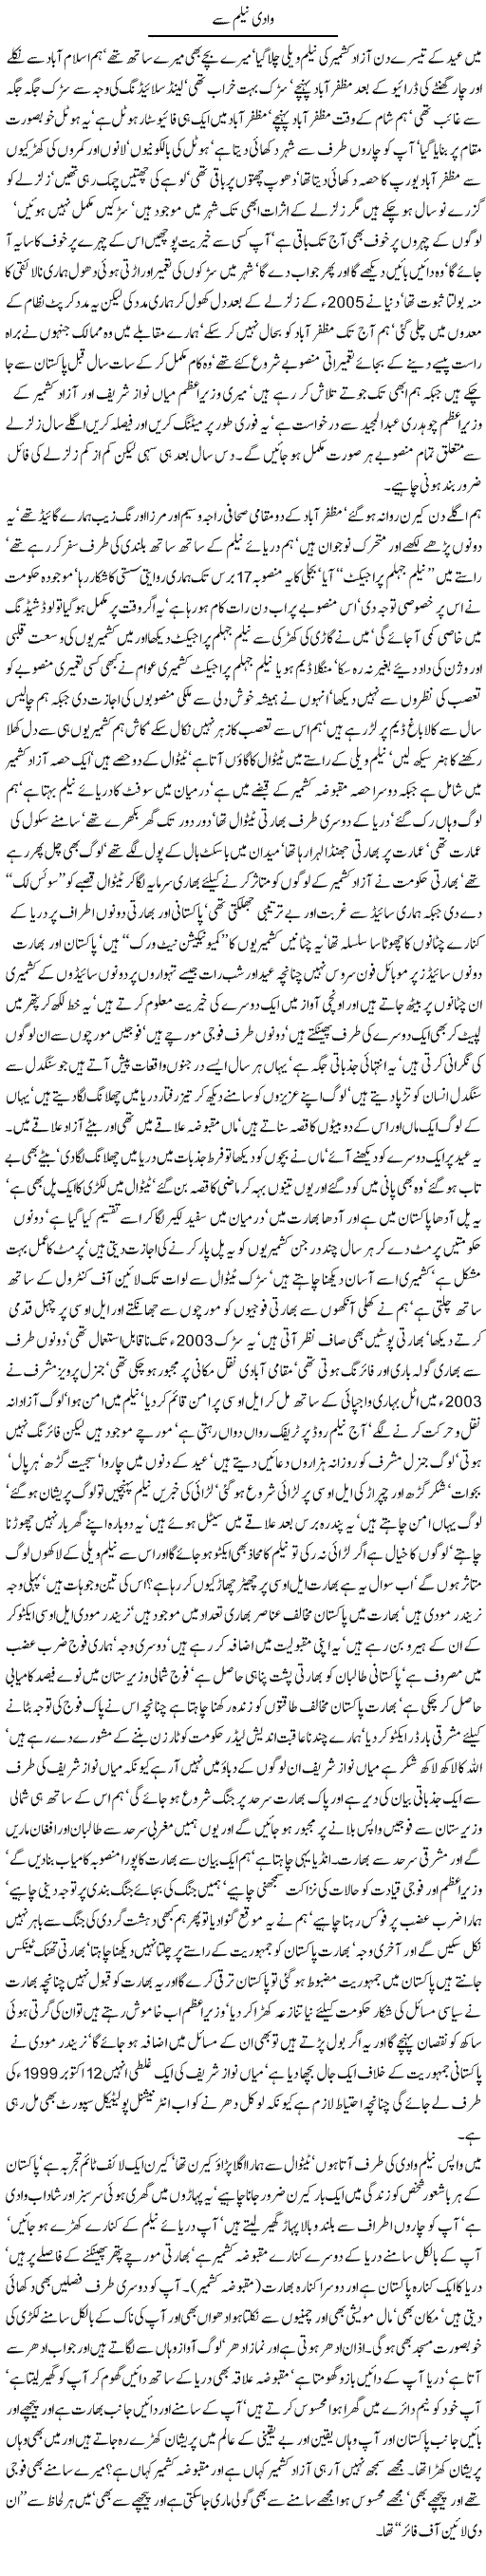 Wadee e Neelam se by Javed Chaudhry